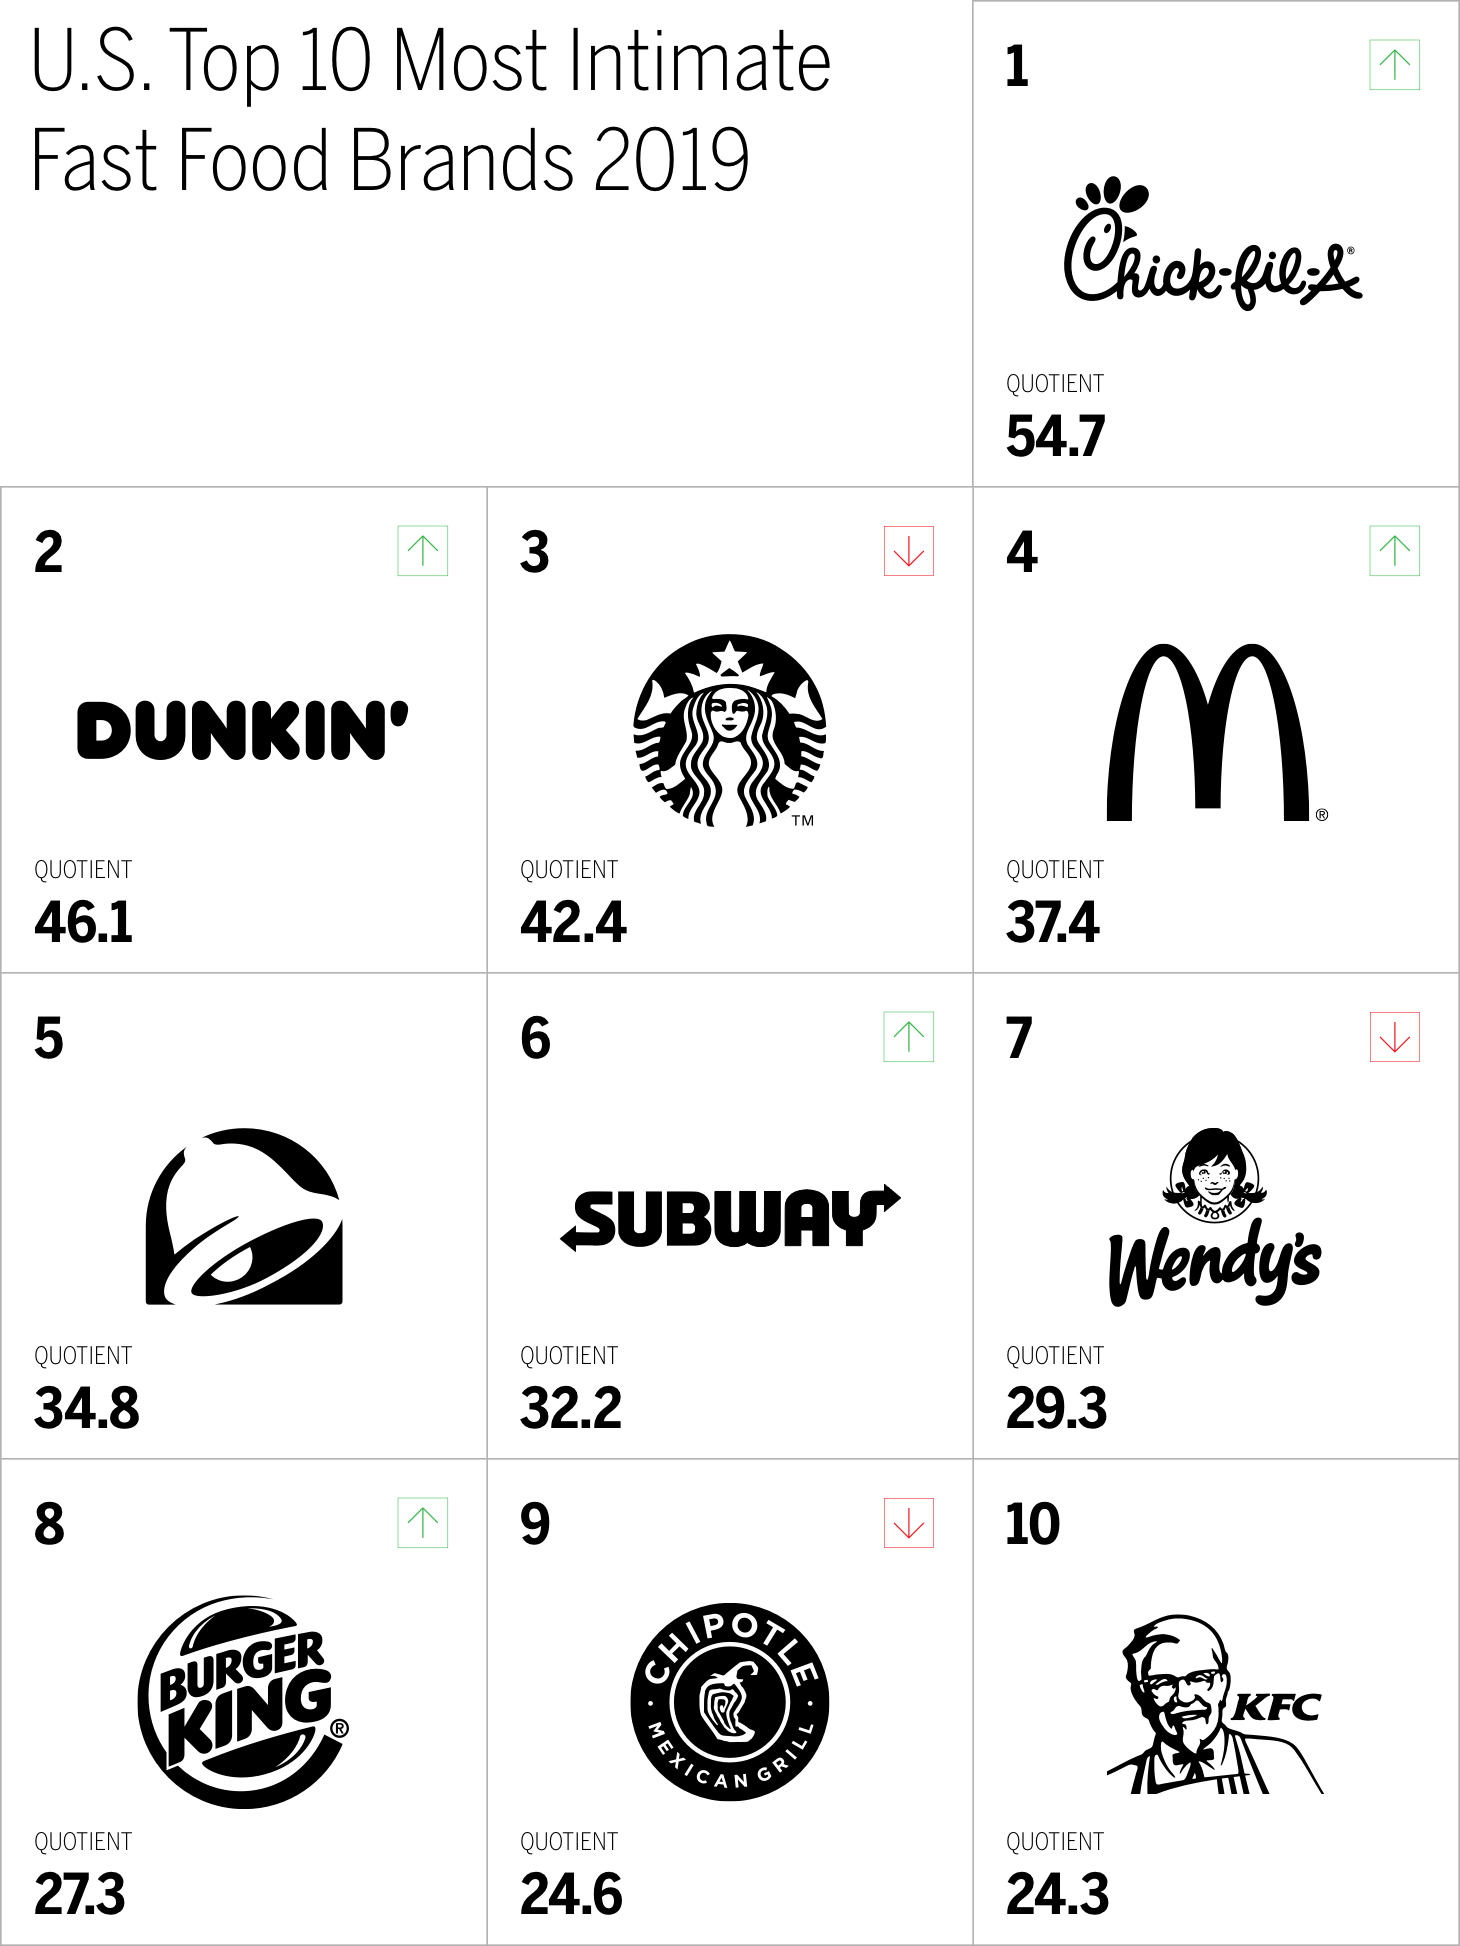 U.S. Top 10 Most Intimate
Fast Food Brands 2019 Chart